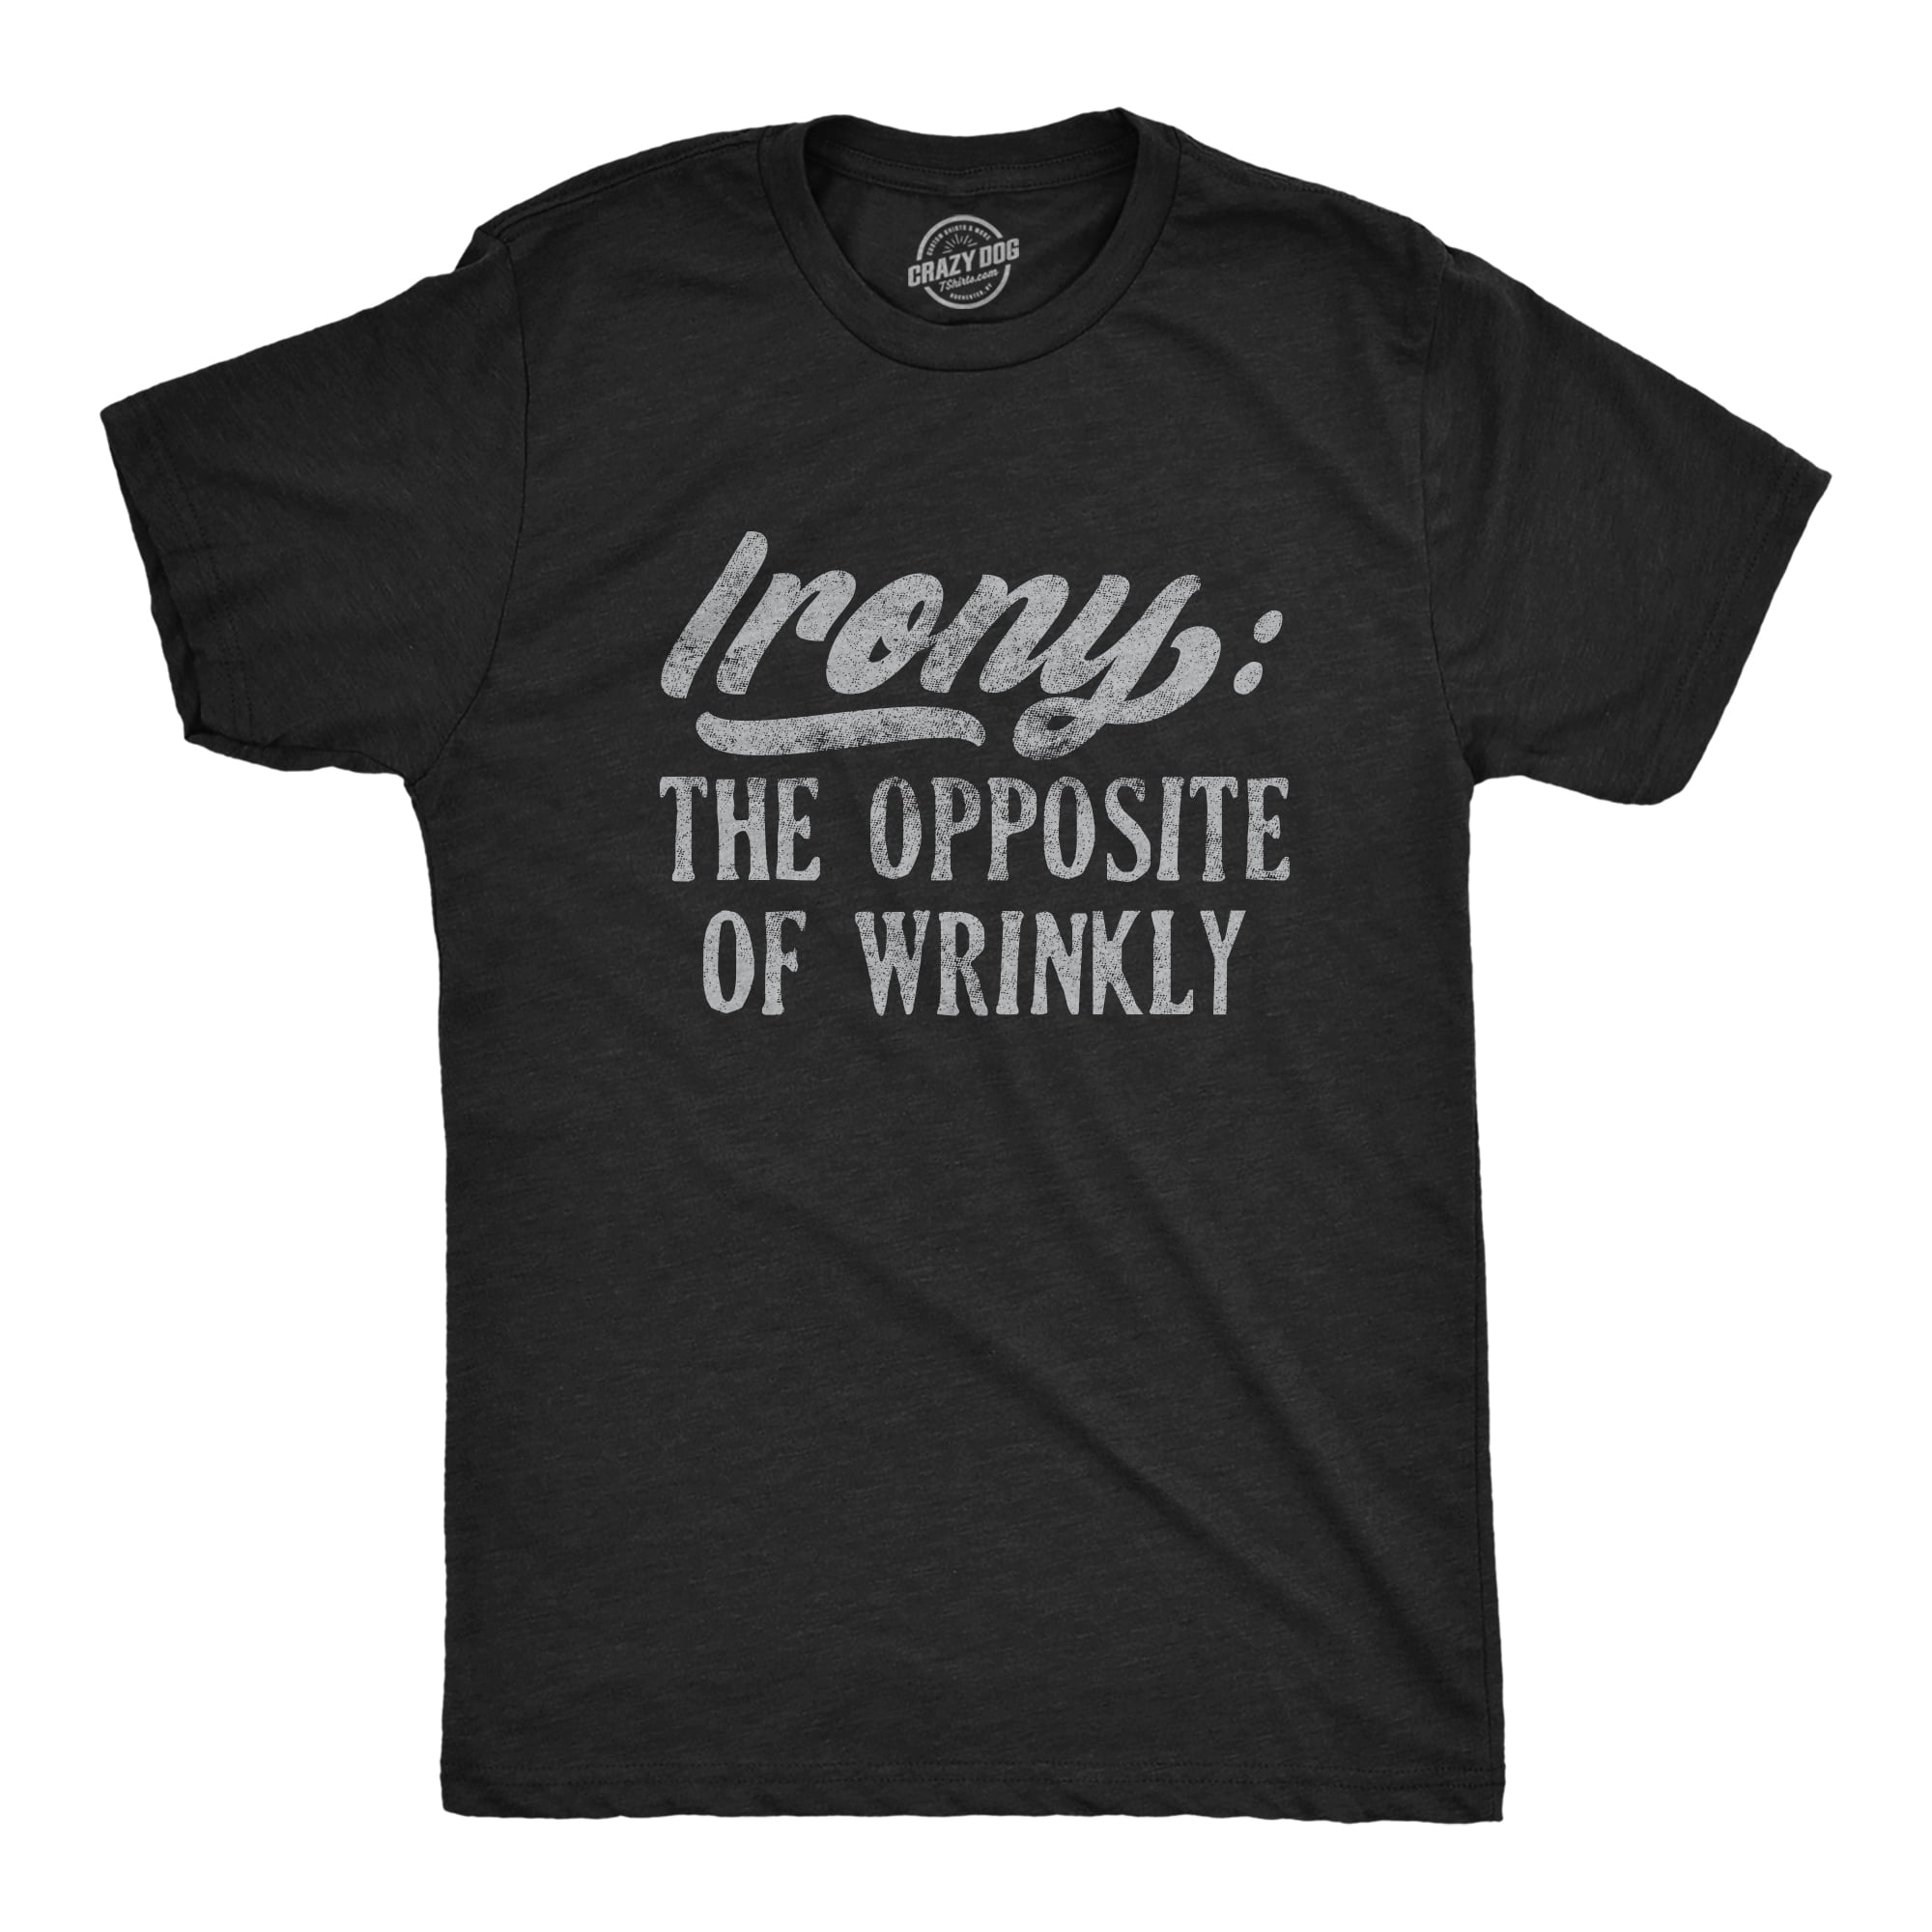 Mens Irony The Opposite Of Wrinkly Tshirt Funny Sarcastic Pun Novelty ...